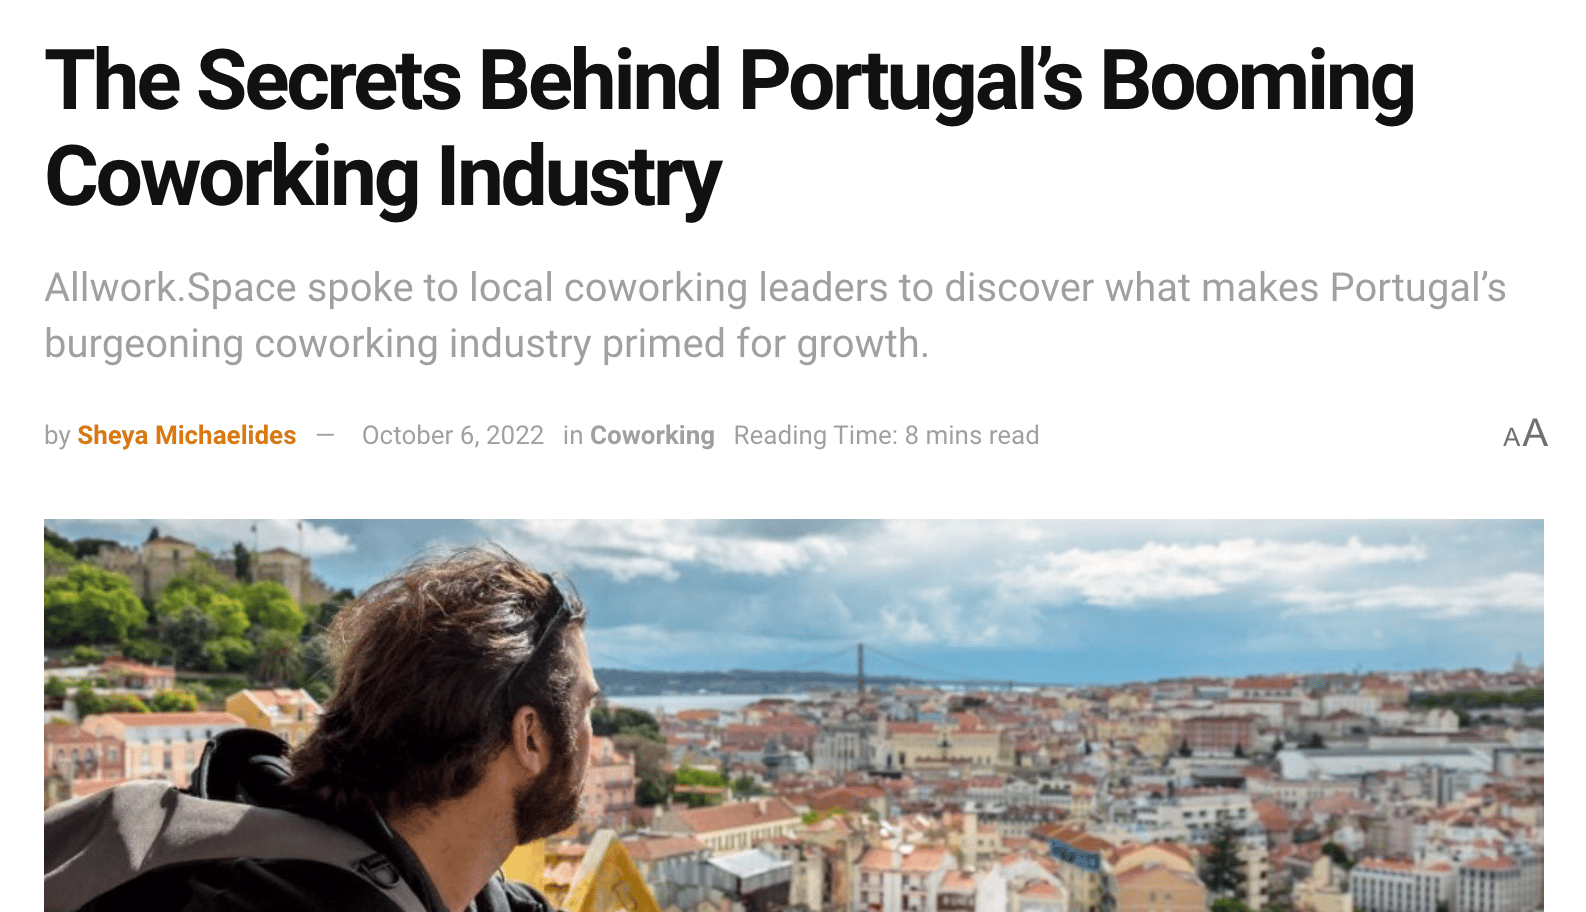 portugal's bboming coworking industry